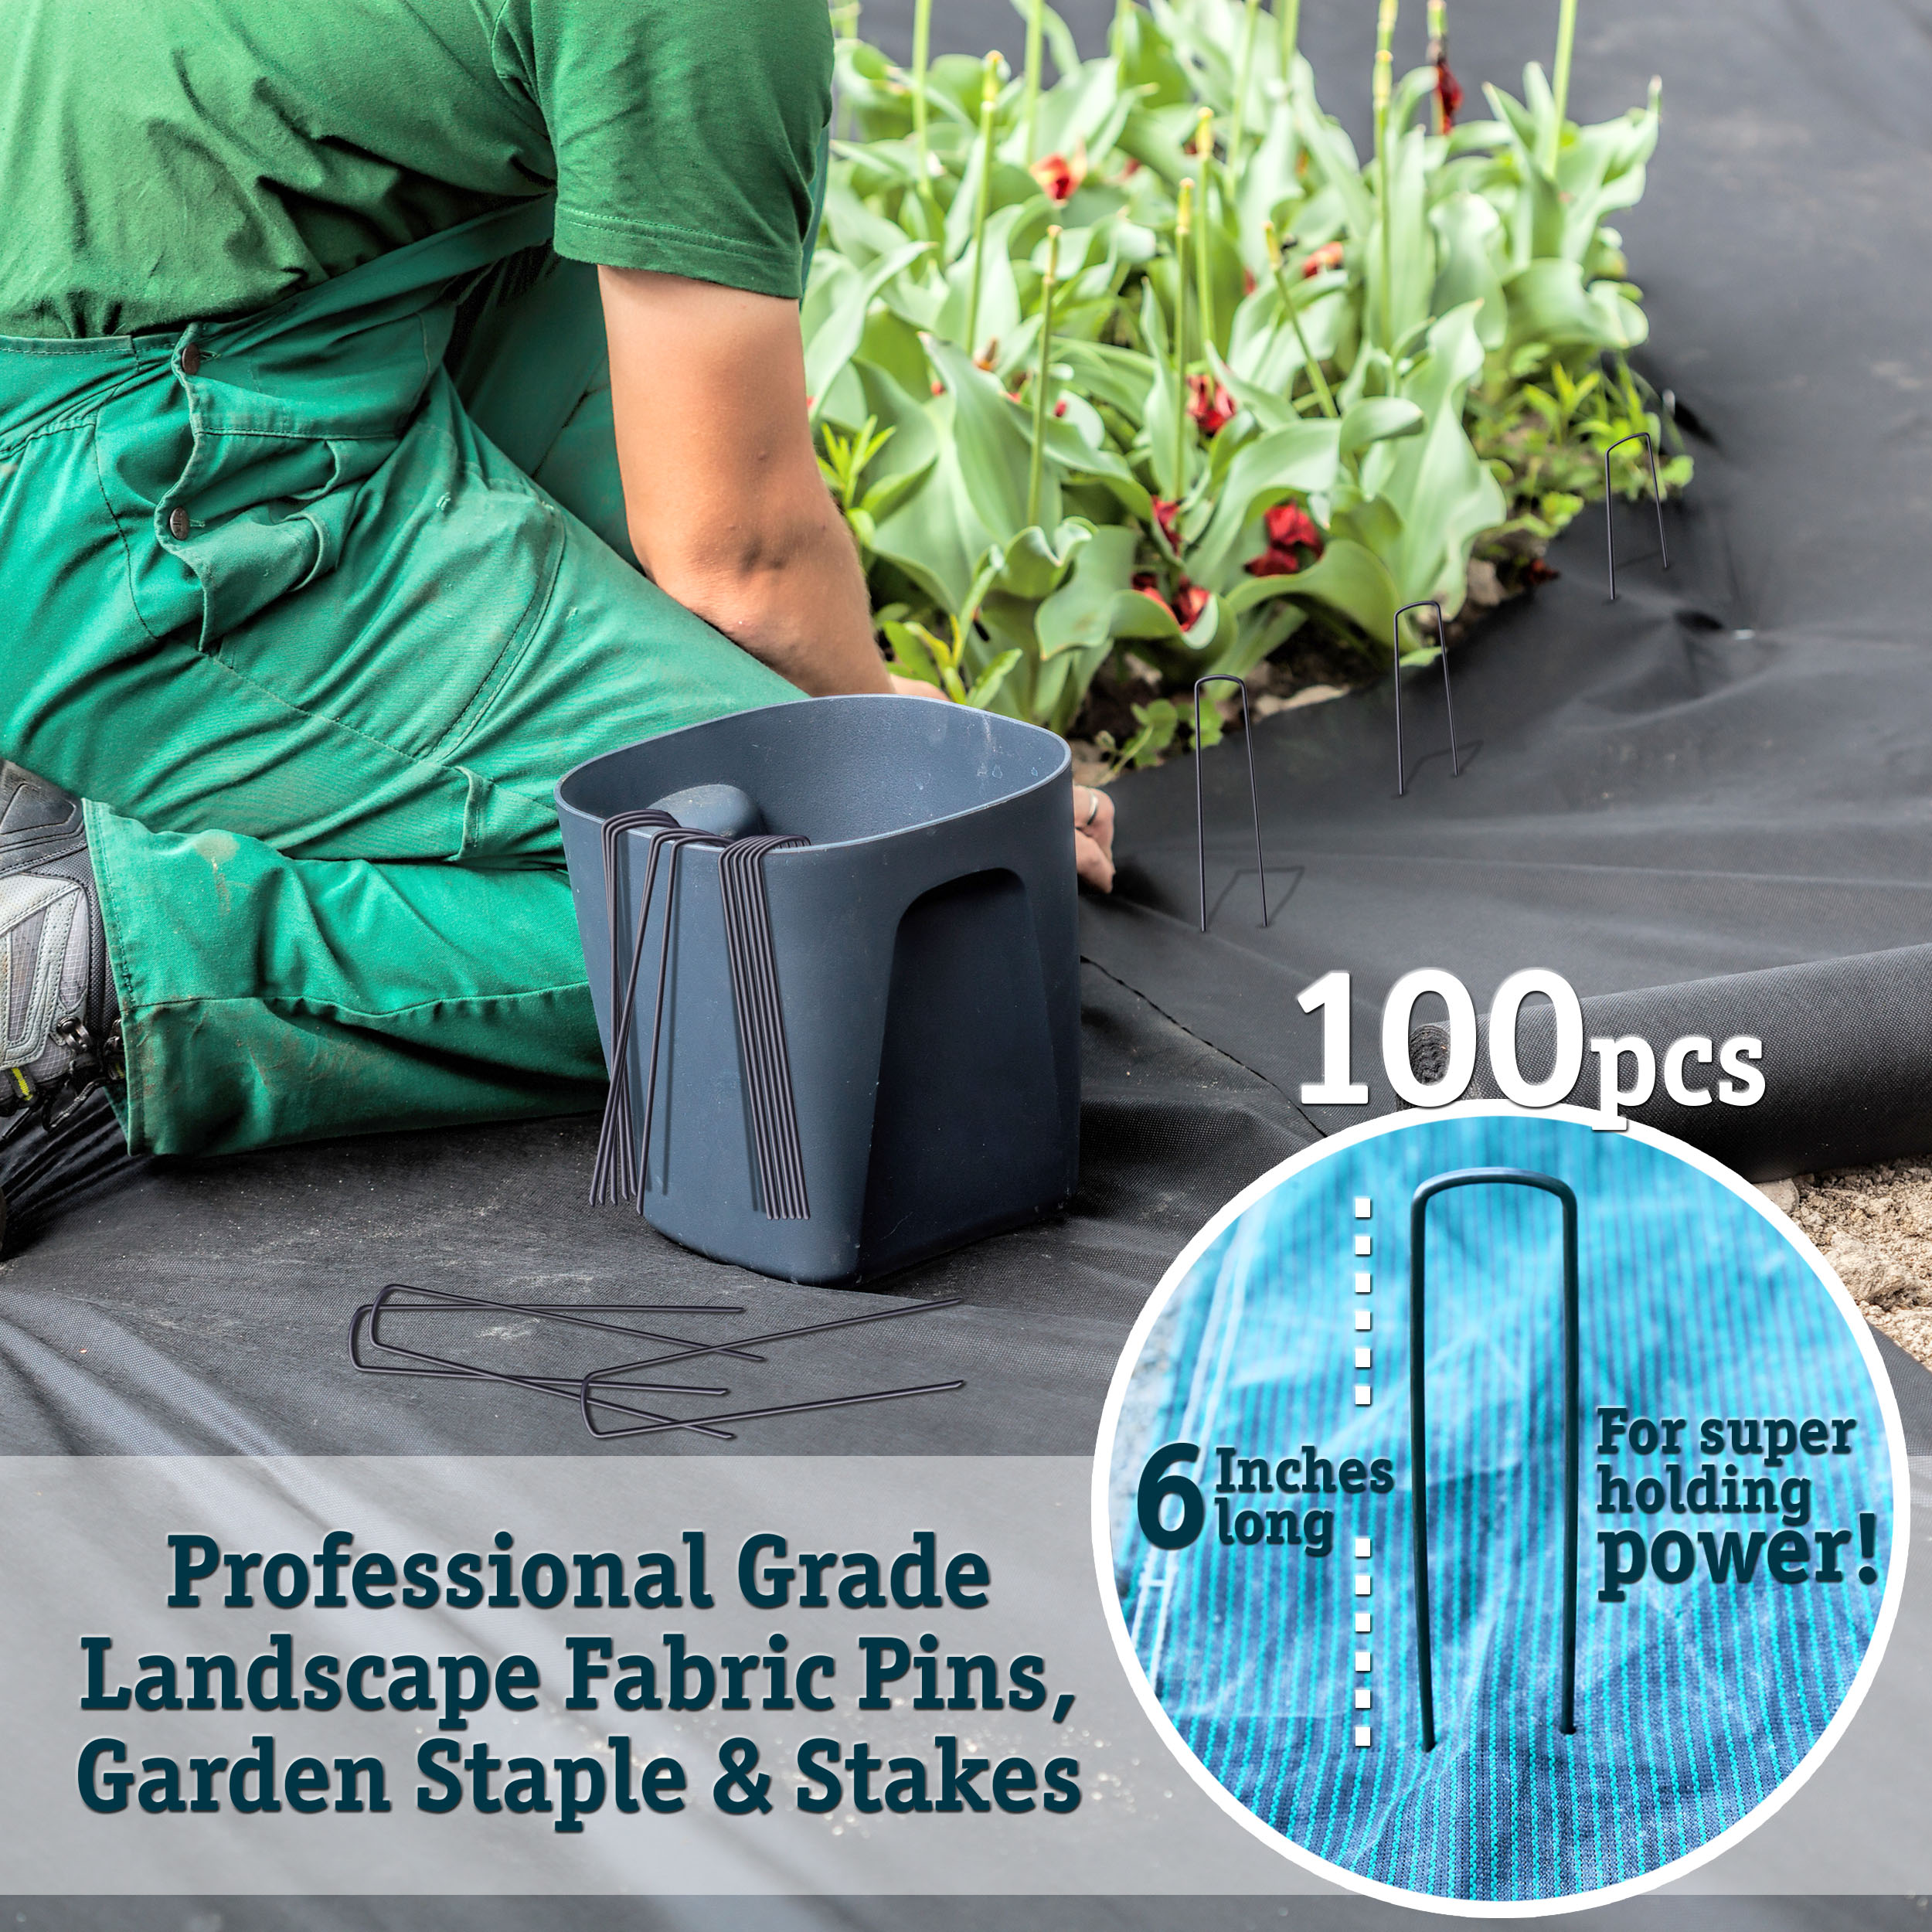 100 6 Inch Landscape Fabric Pins Garden Staples Stakes